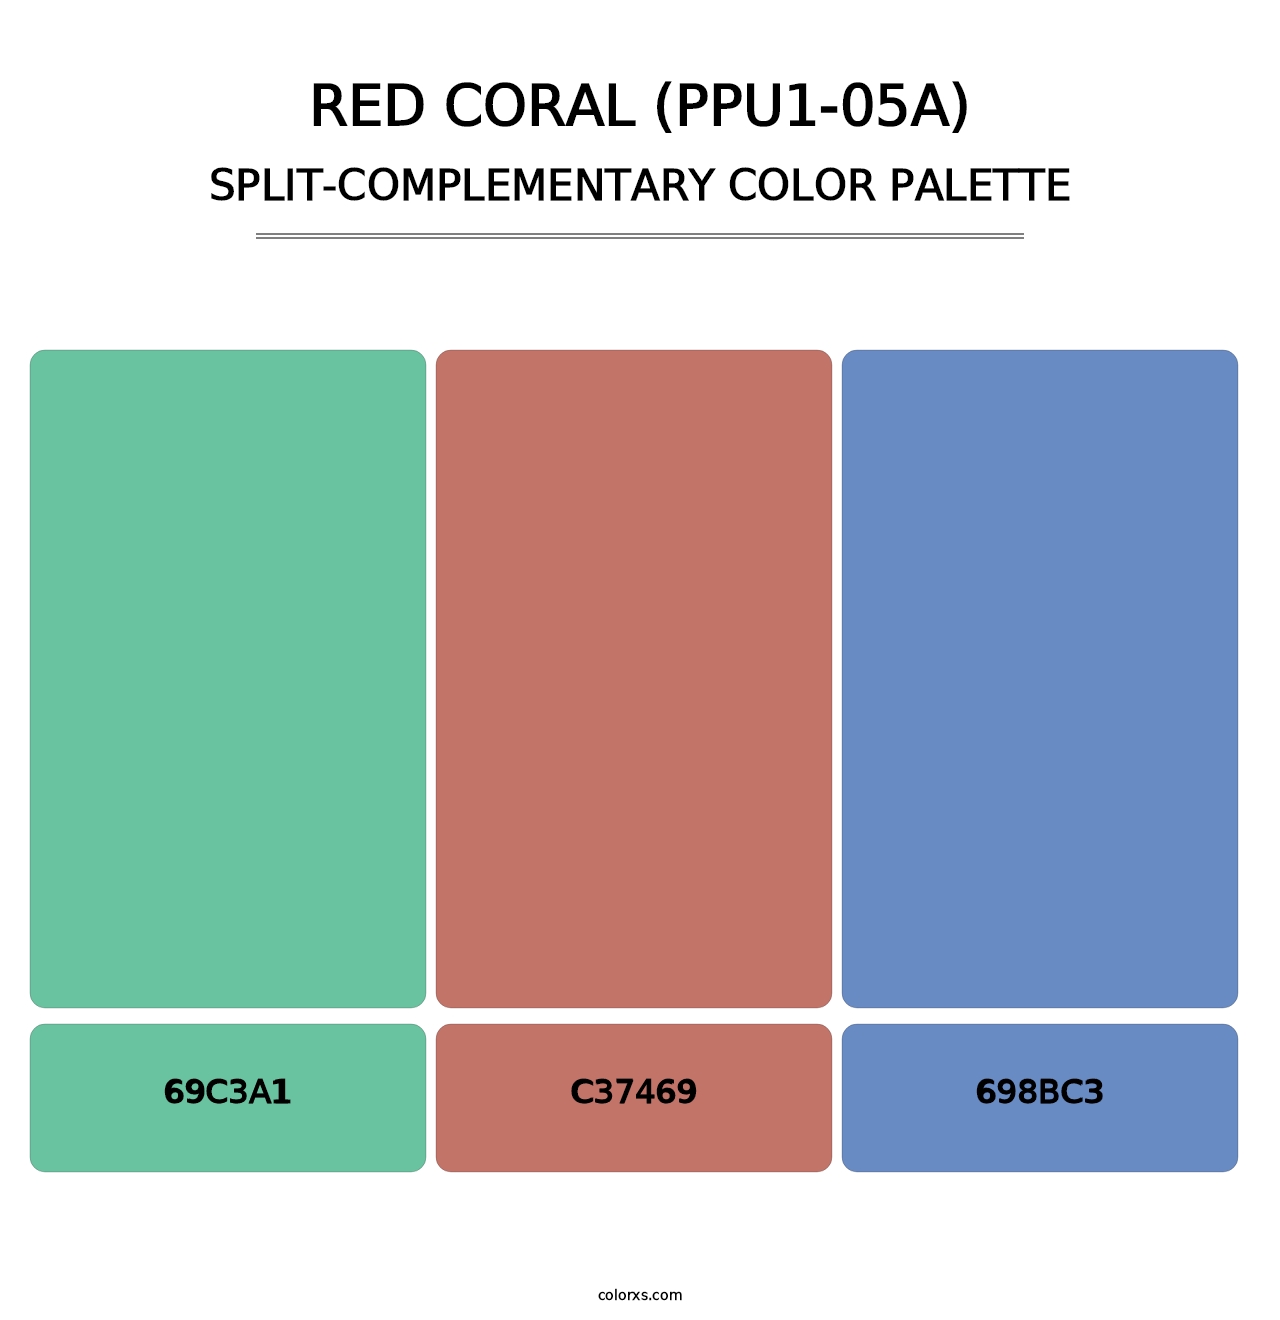 Red Coral (PPU1-05A) - Split-Complementary Color Palette